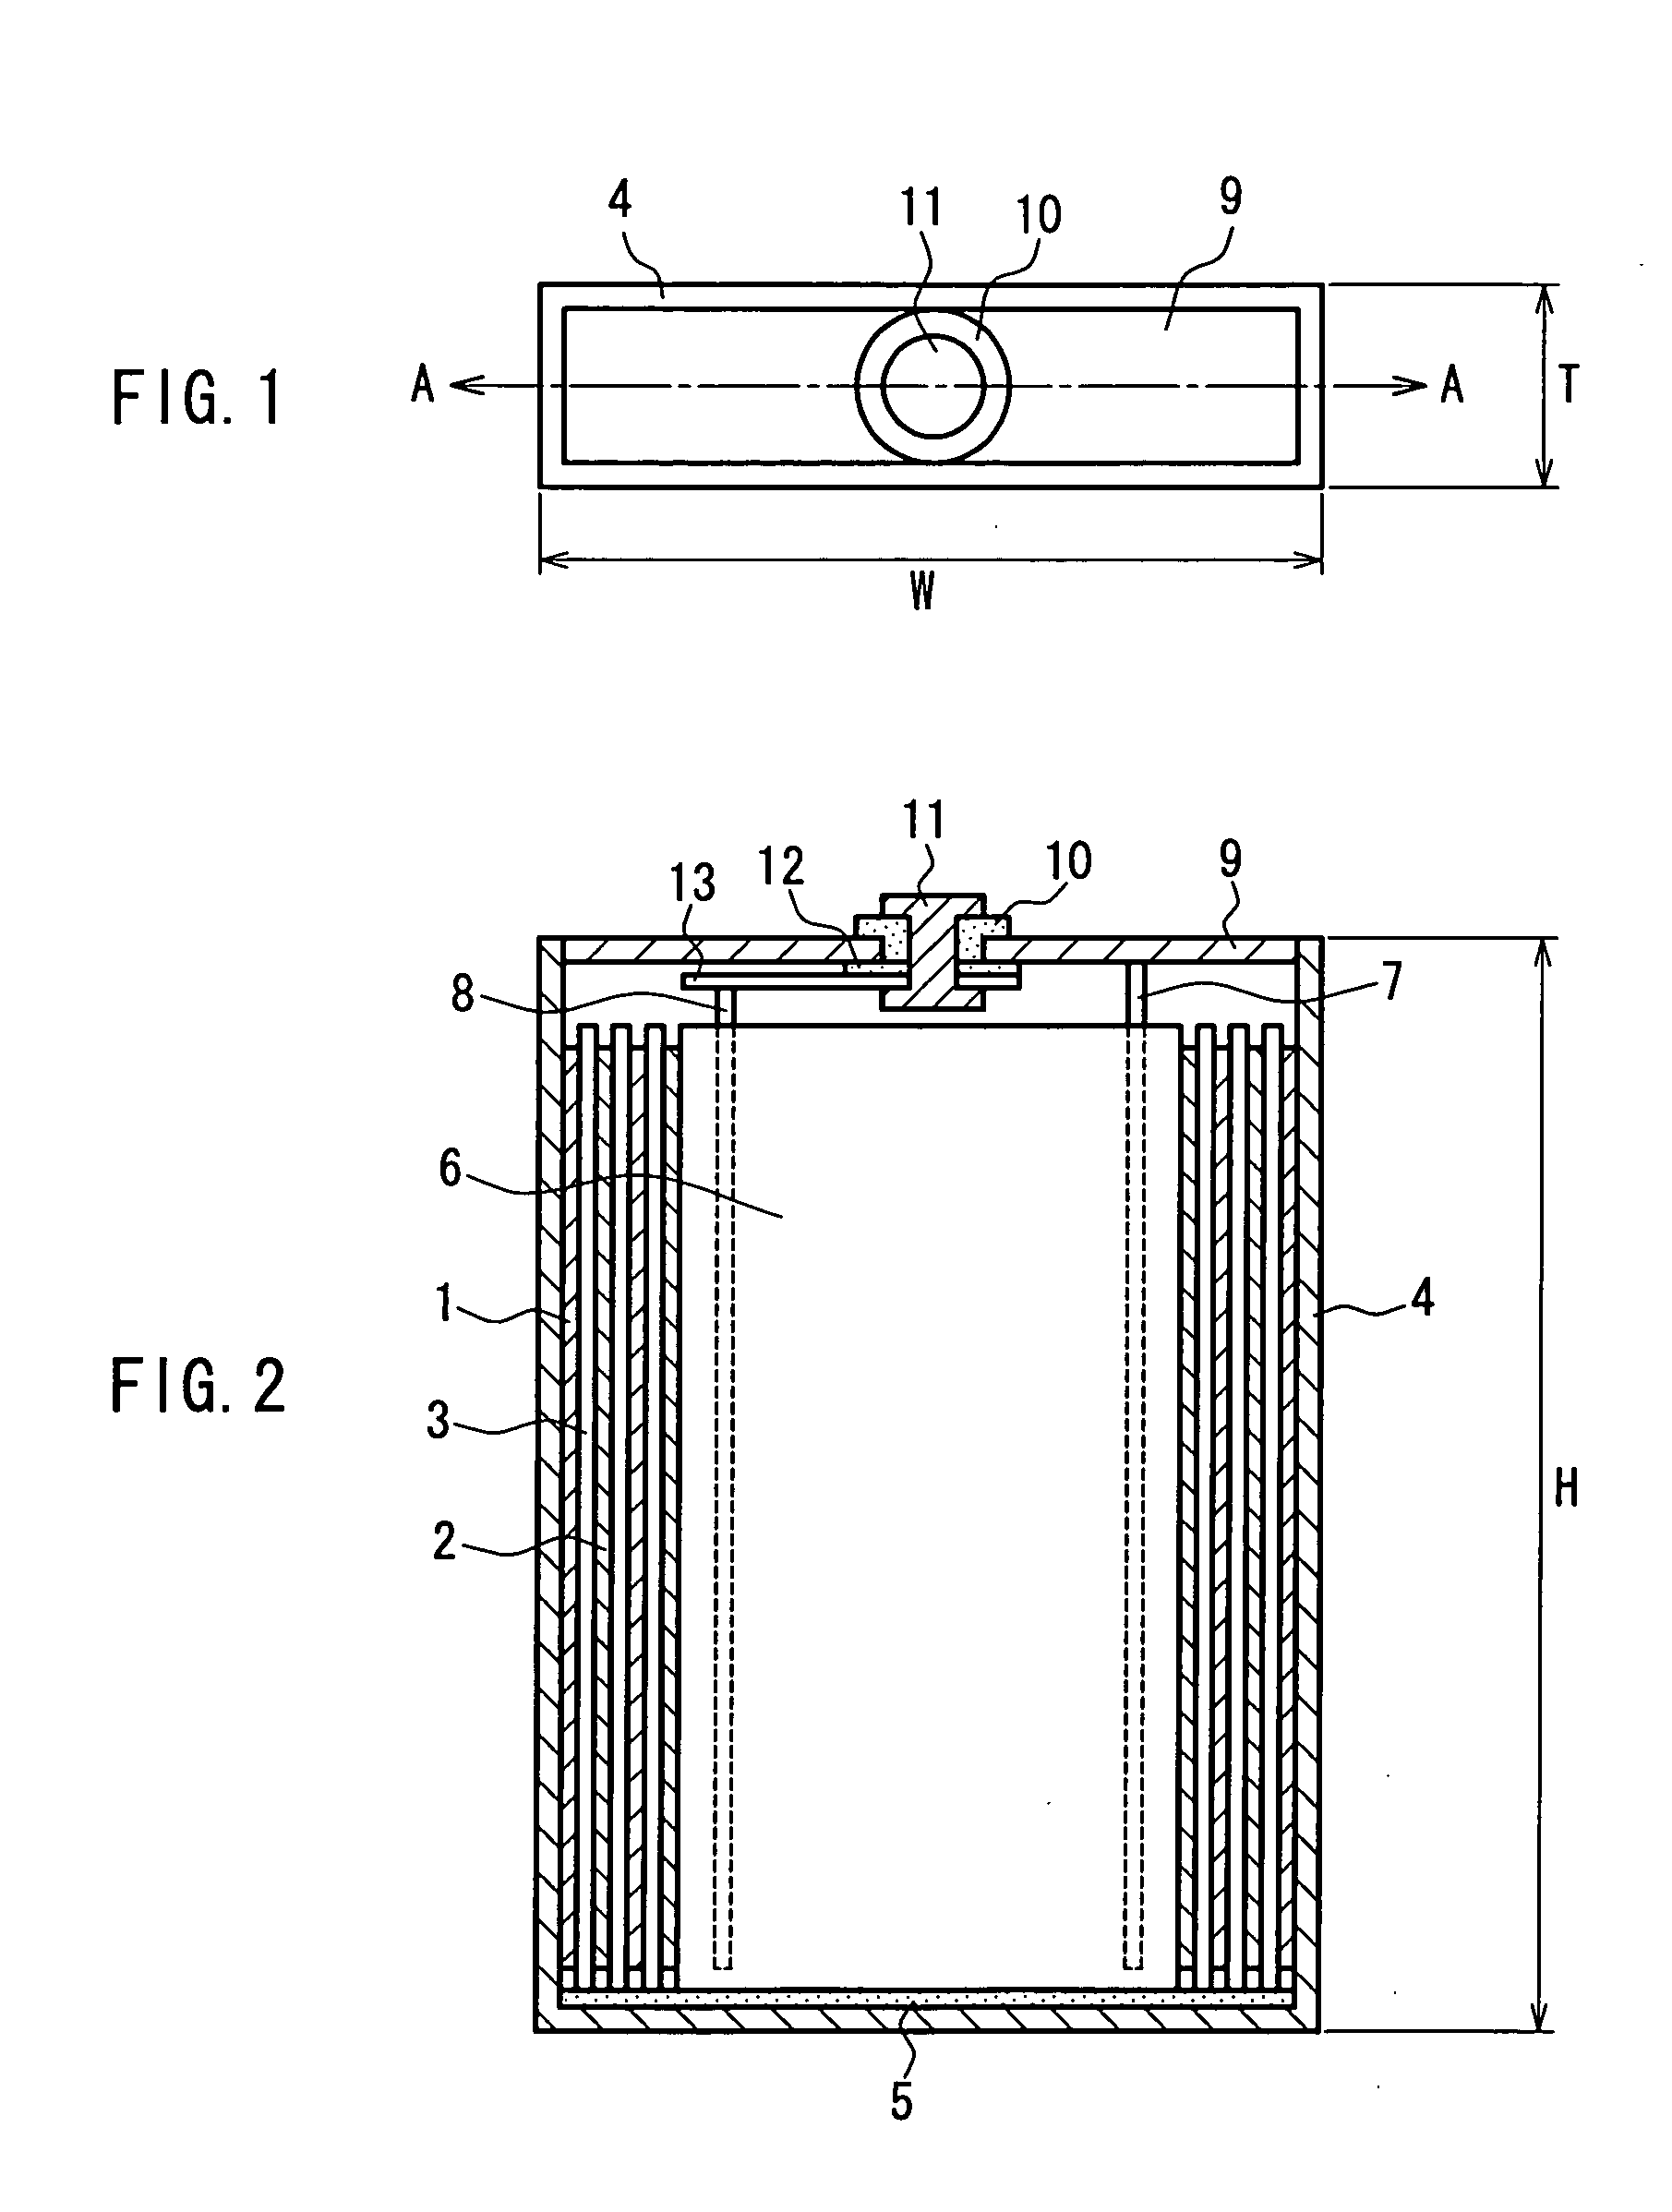 Nonaqueous secondary cell and electronic device incorporating same